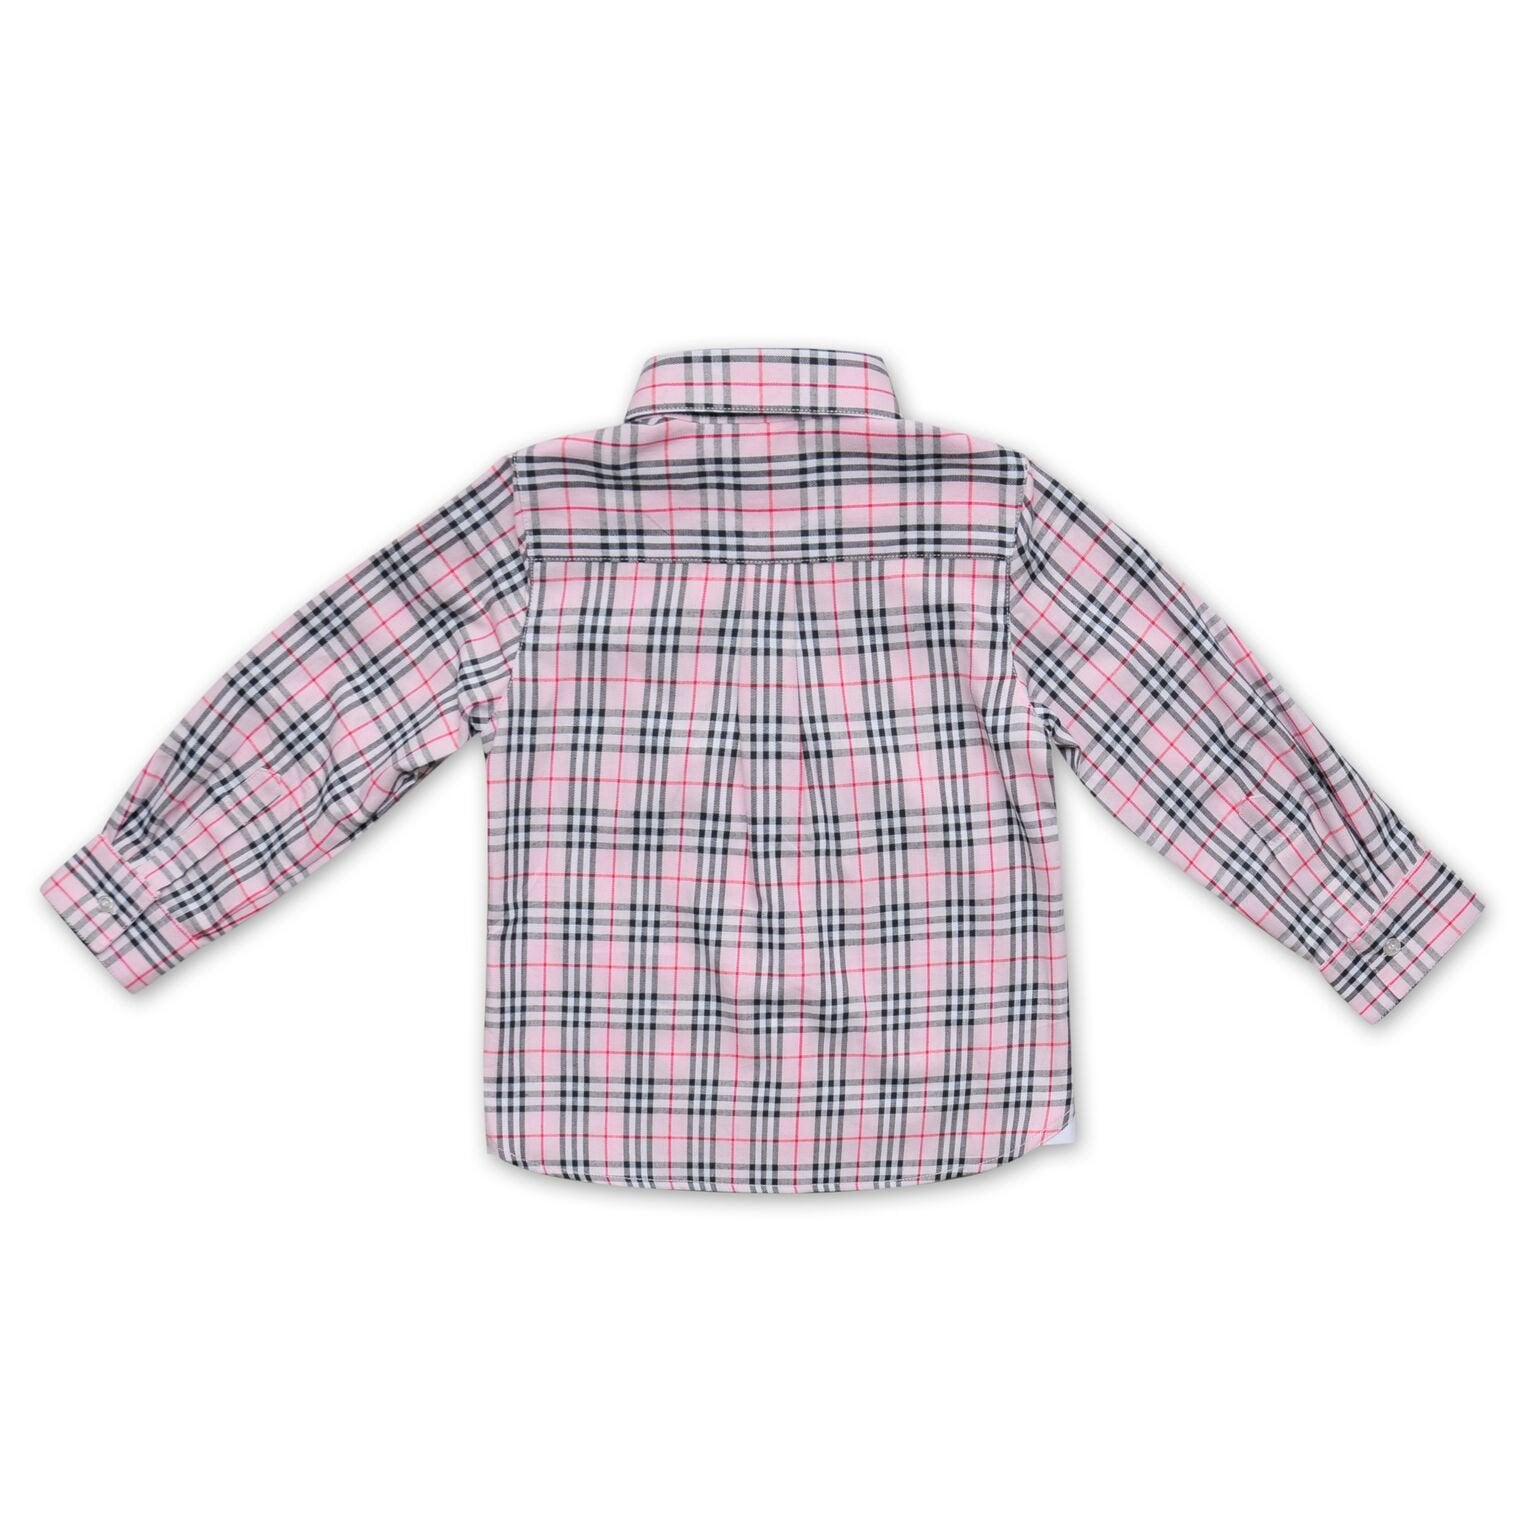 Pink, Red And White Oxford Shirt - Cou Cou Baby